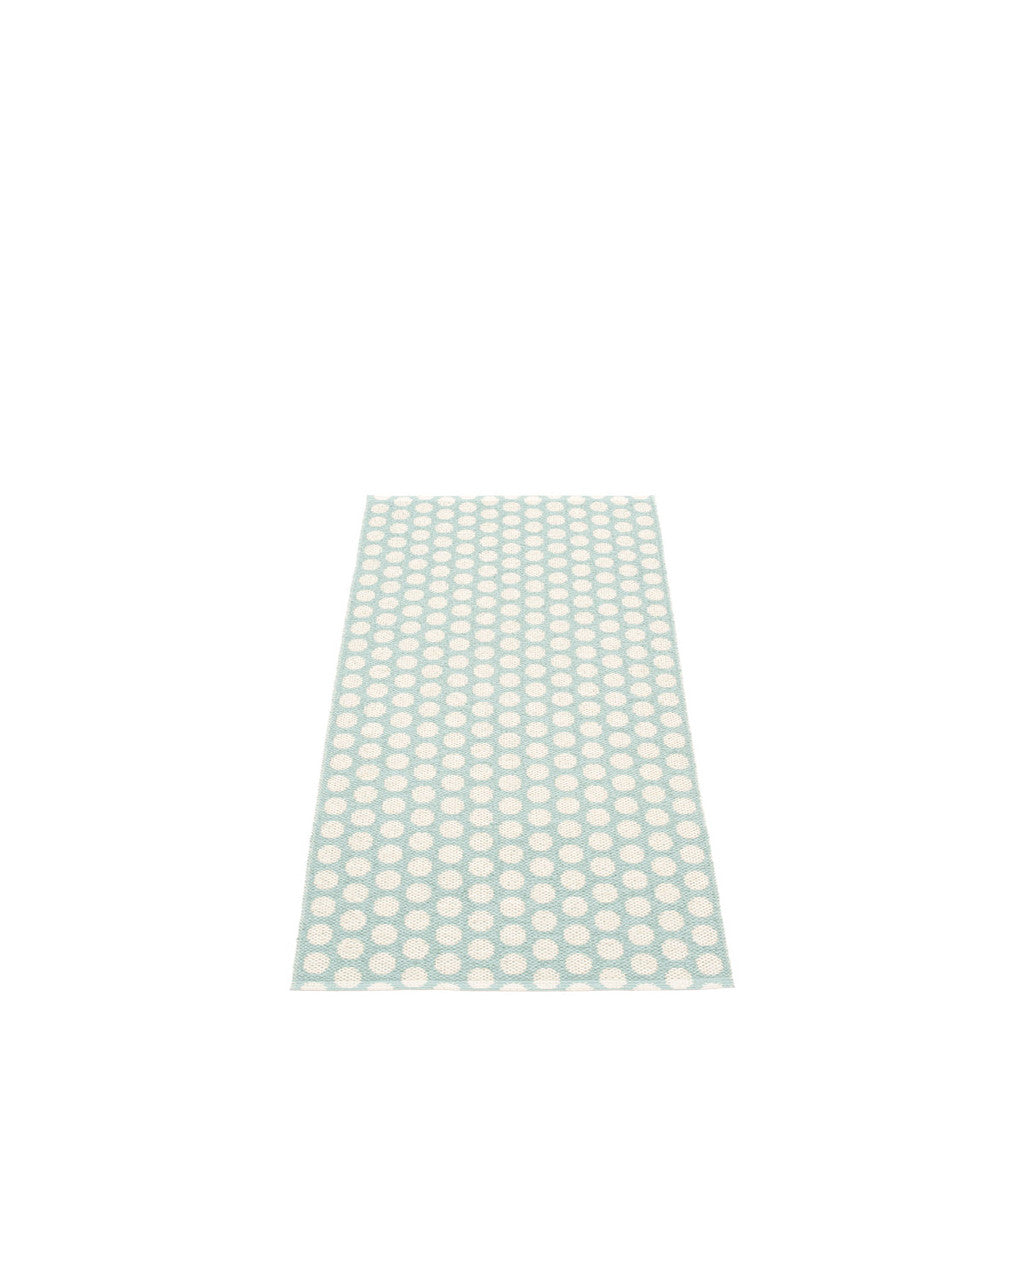 Rug NOA Pale Turquoise by Pappelina